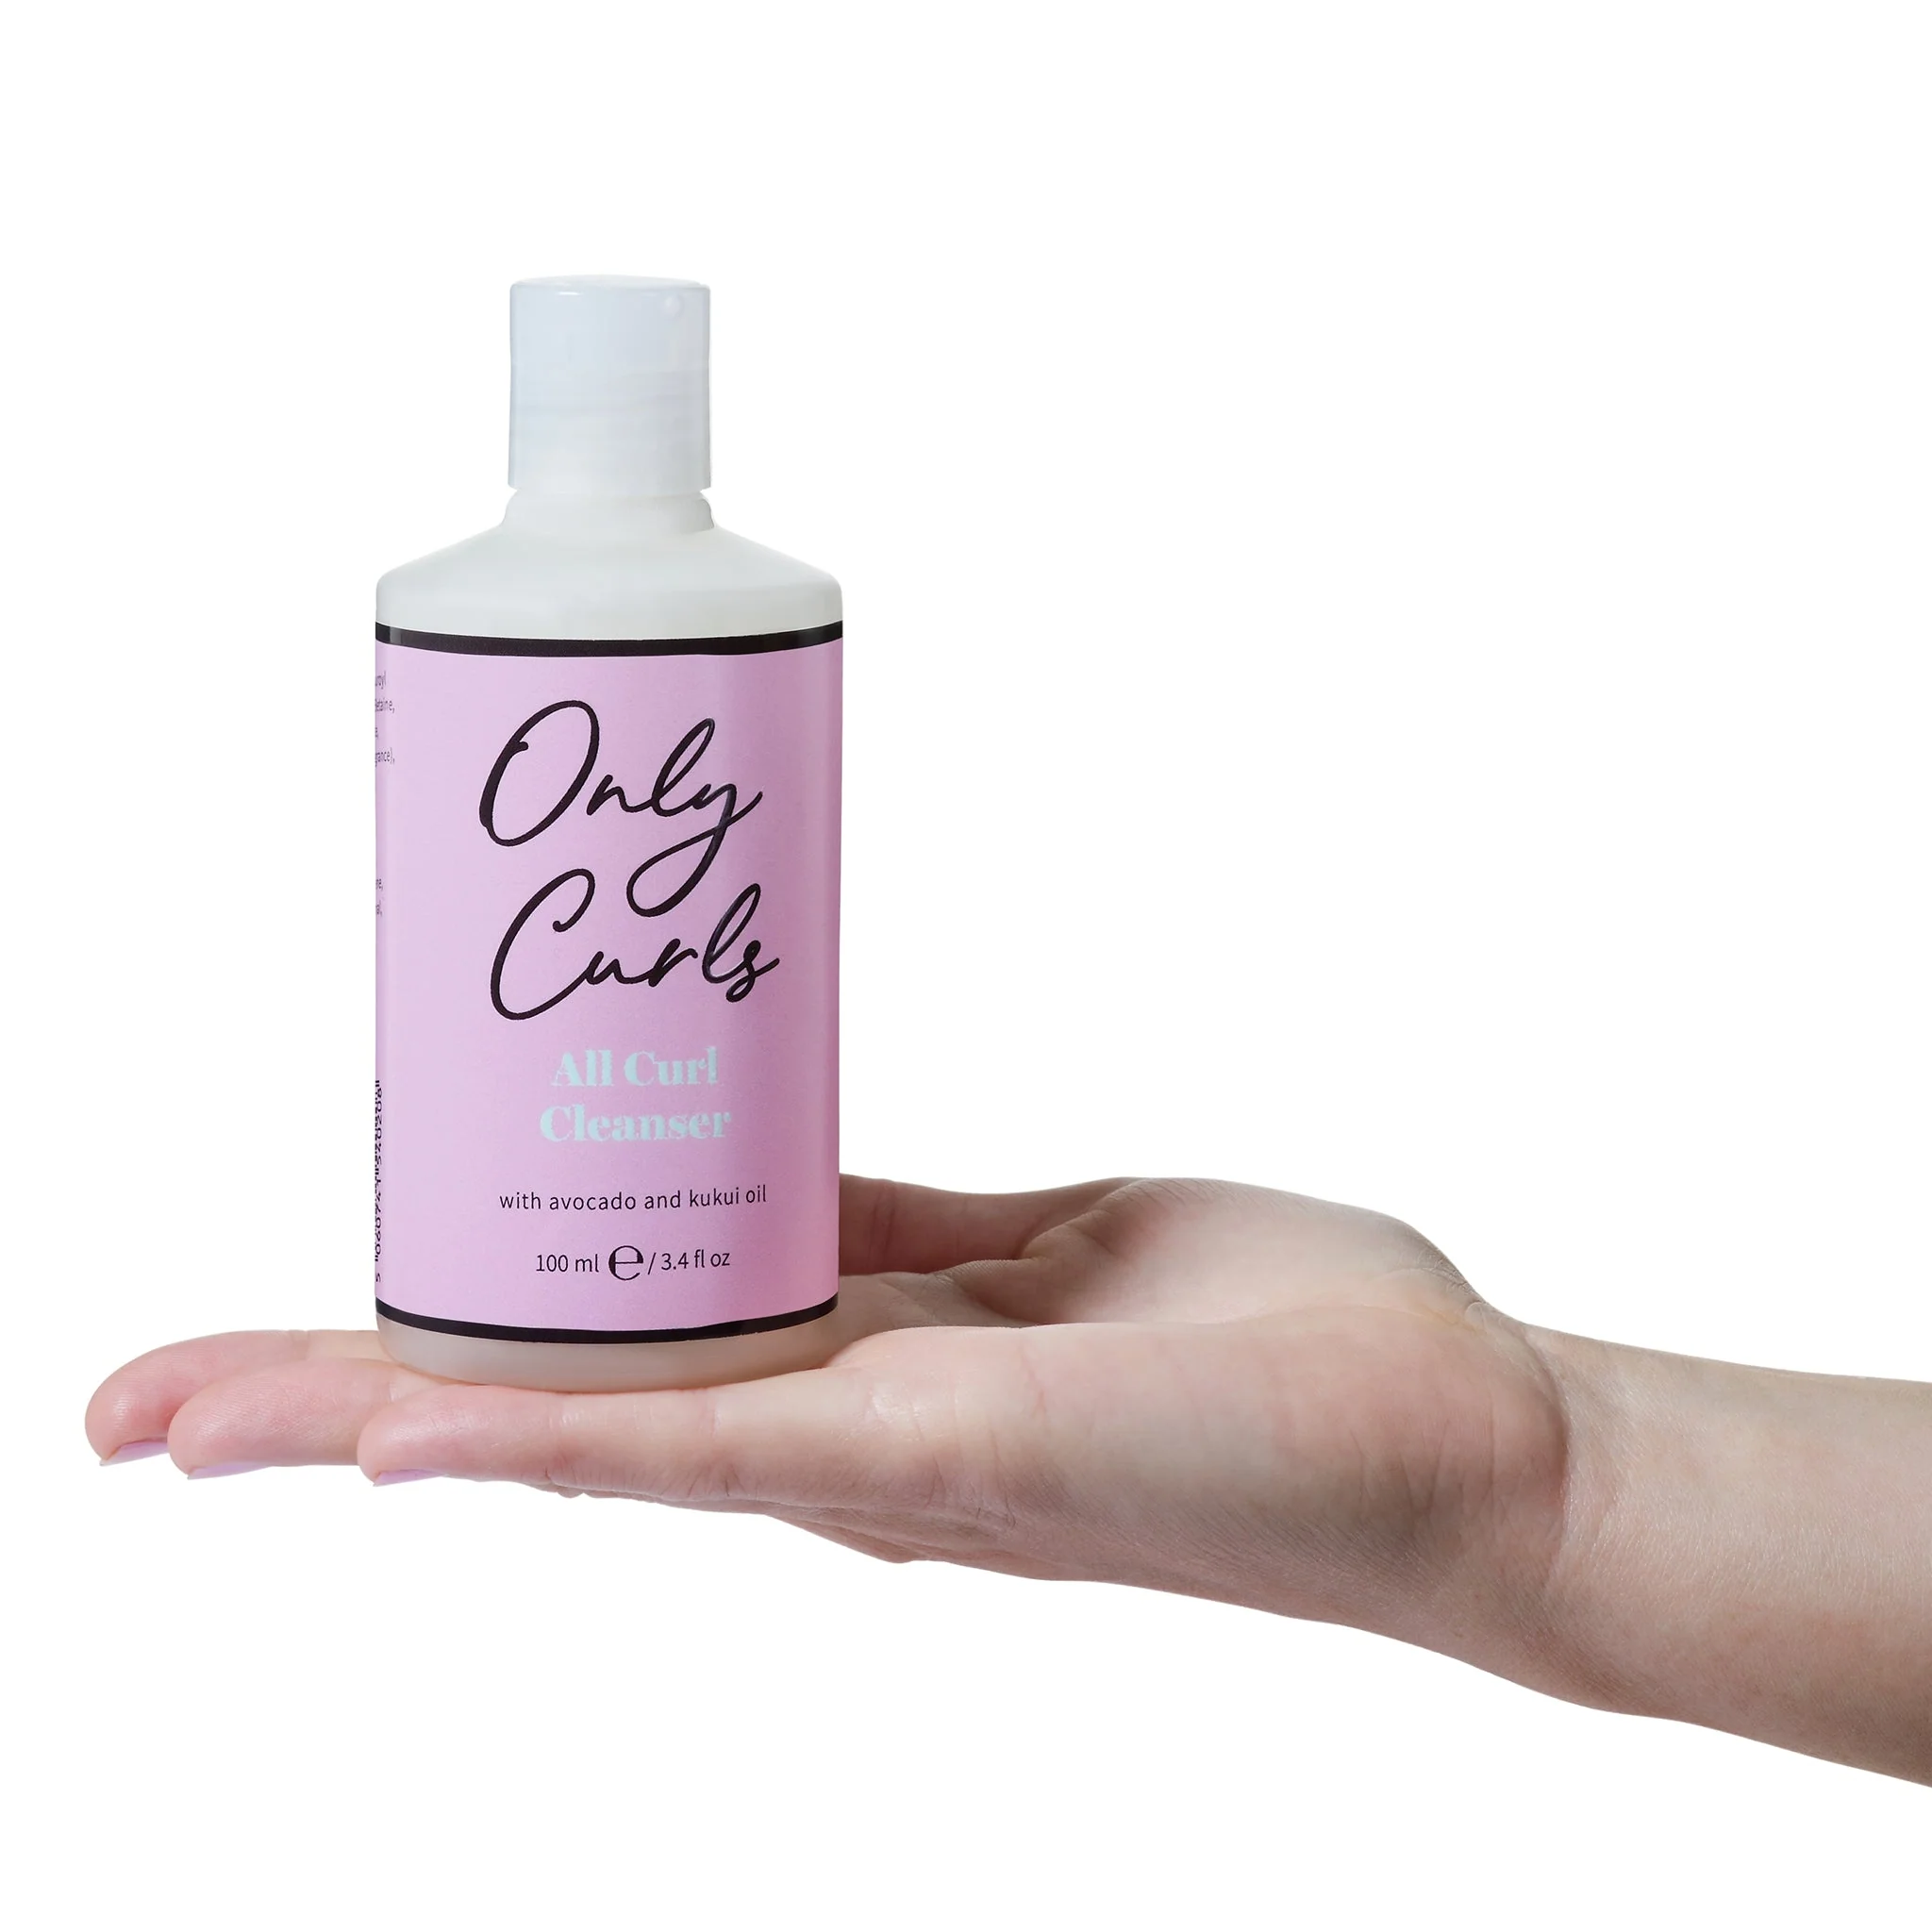 Only Curls All Curl Cleanser - Travel Size